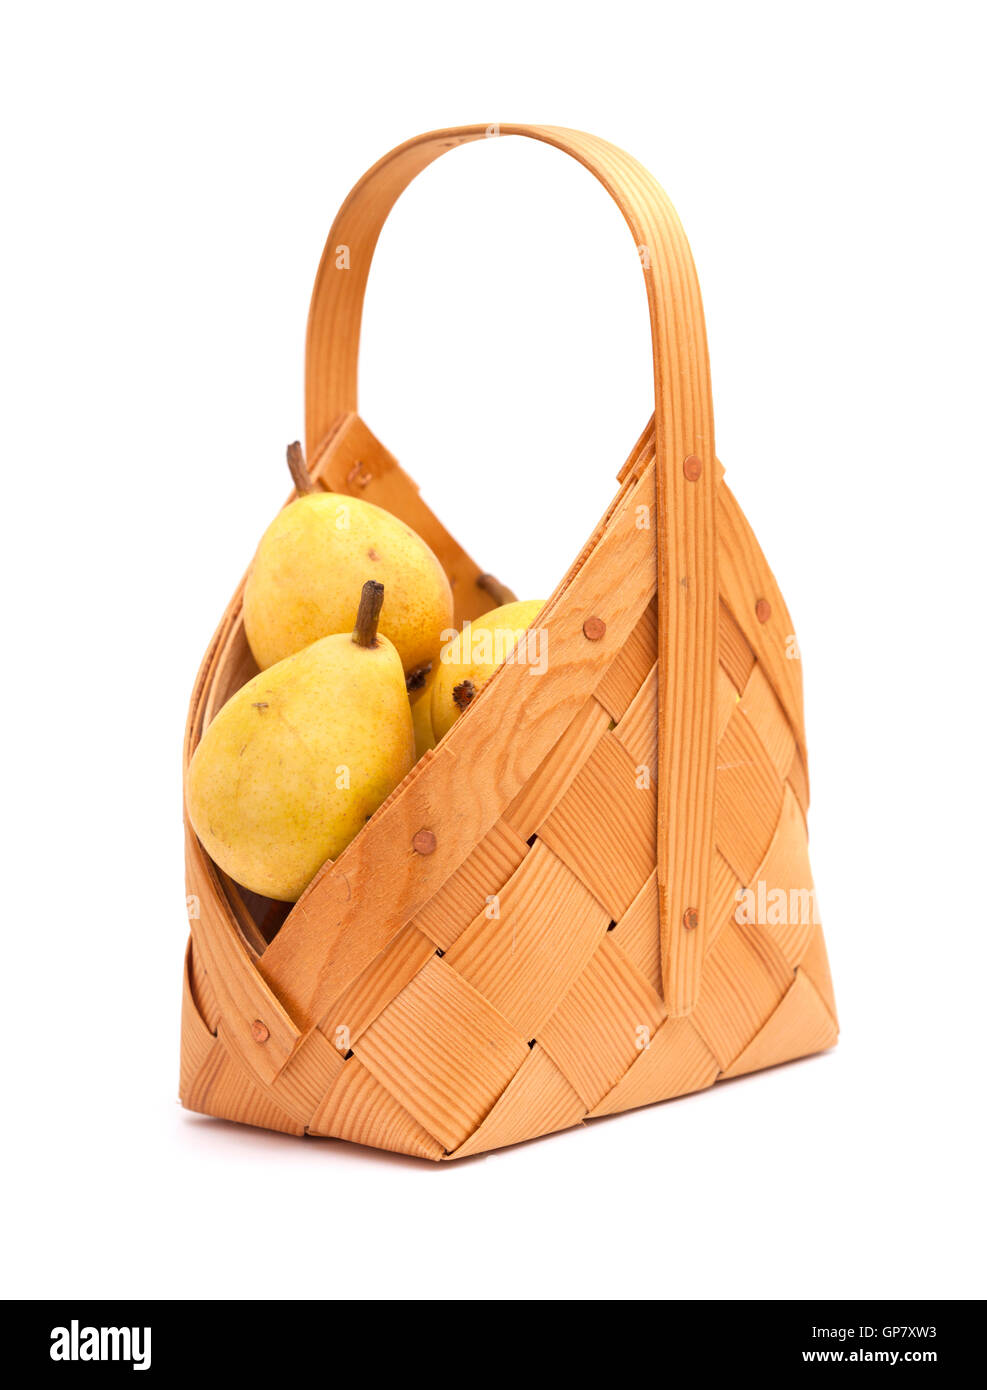 small birch bark basket full of small yellow pears isolated on white background Stock Photo